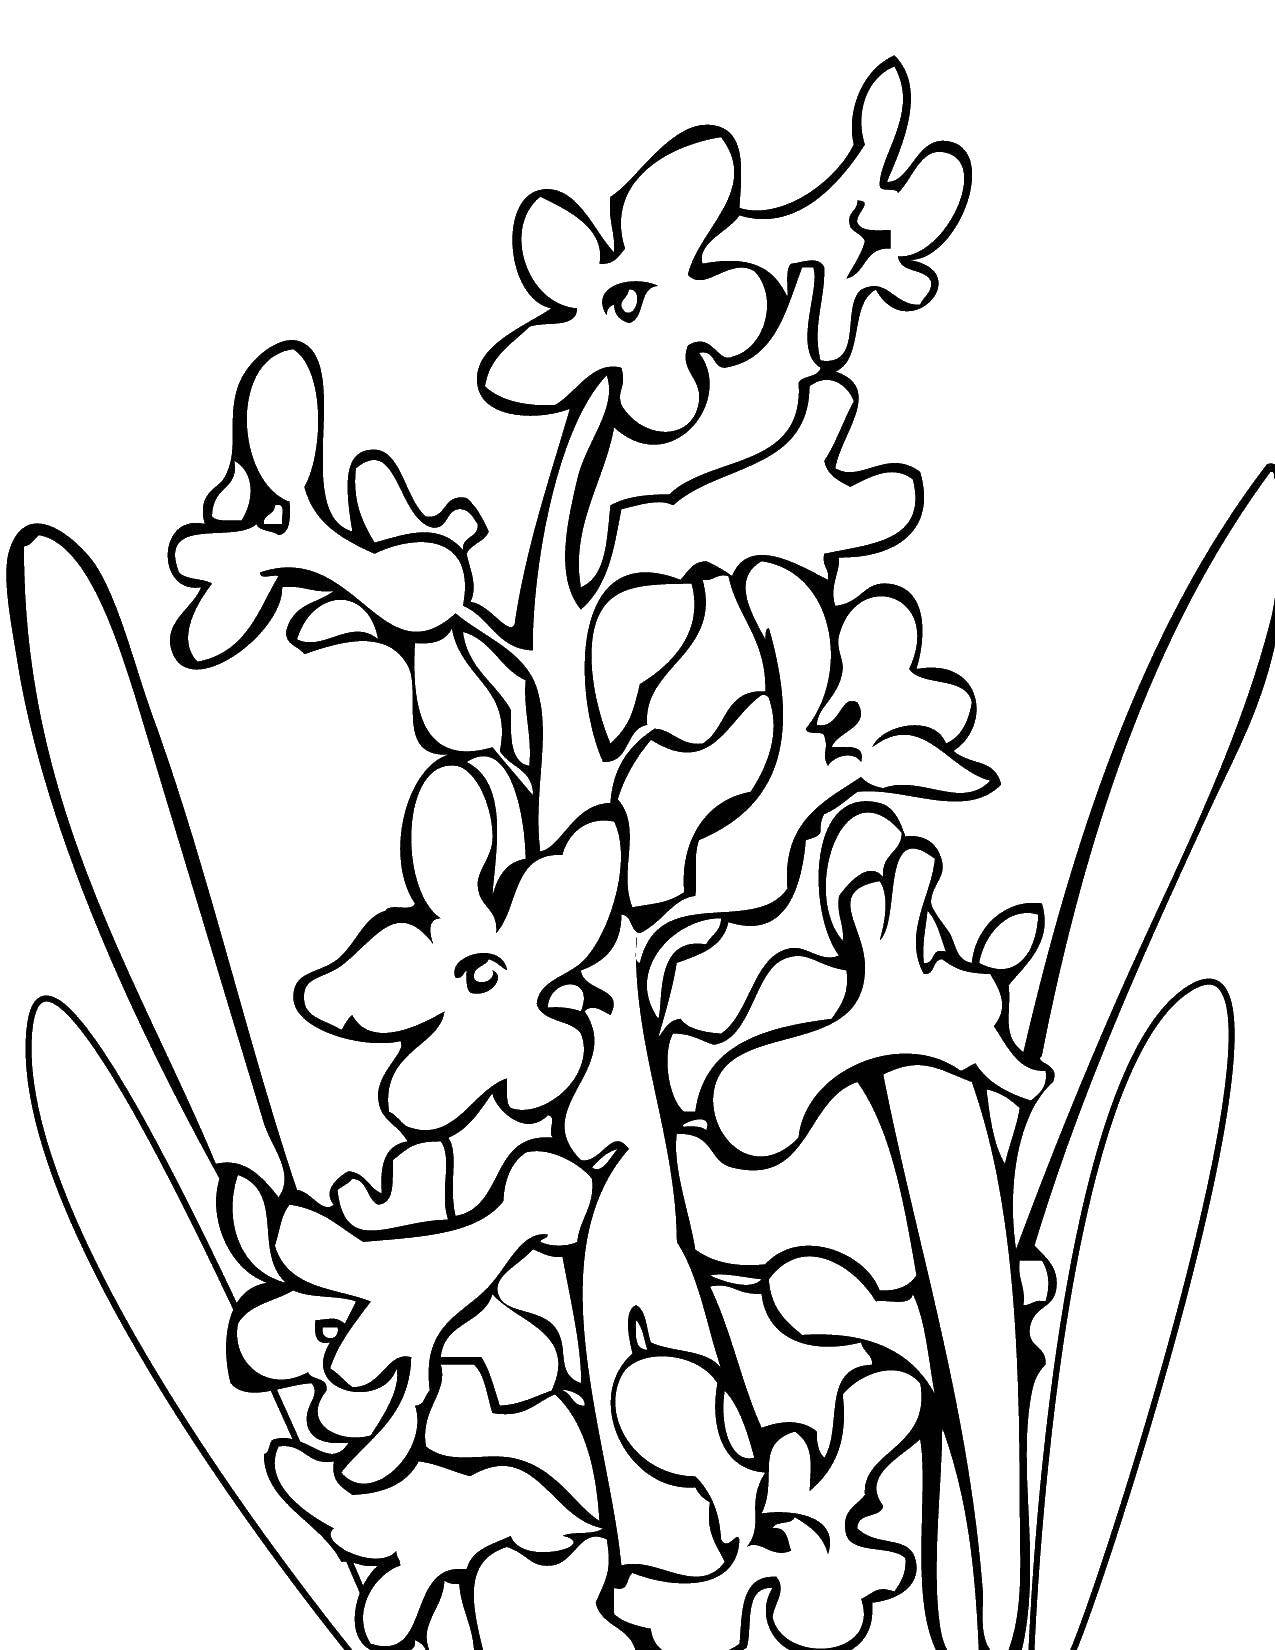 Coloring Little flowers. Category flowers. Tags:  Flowers.